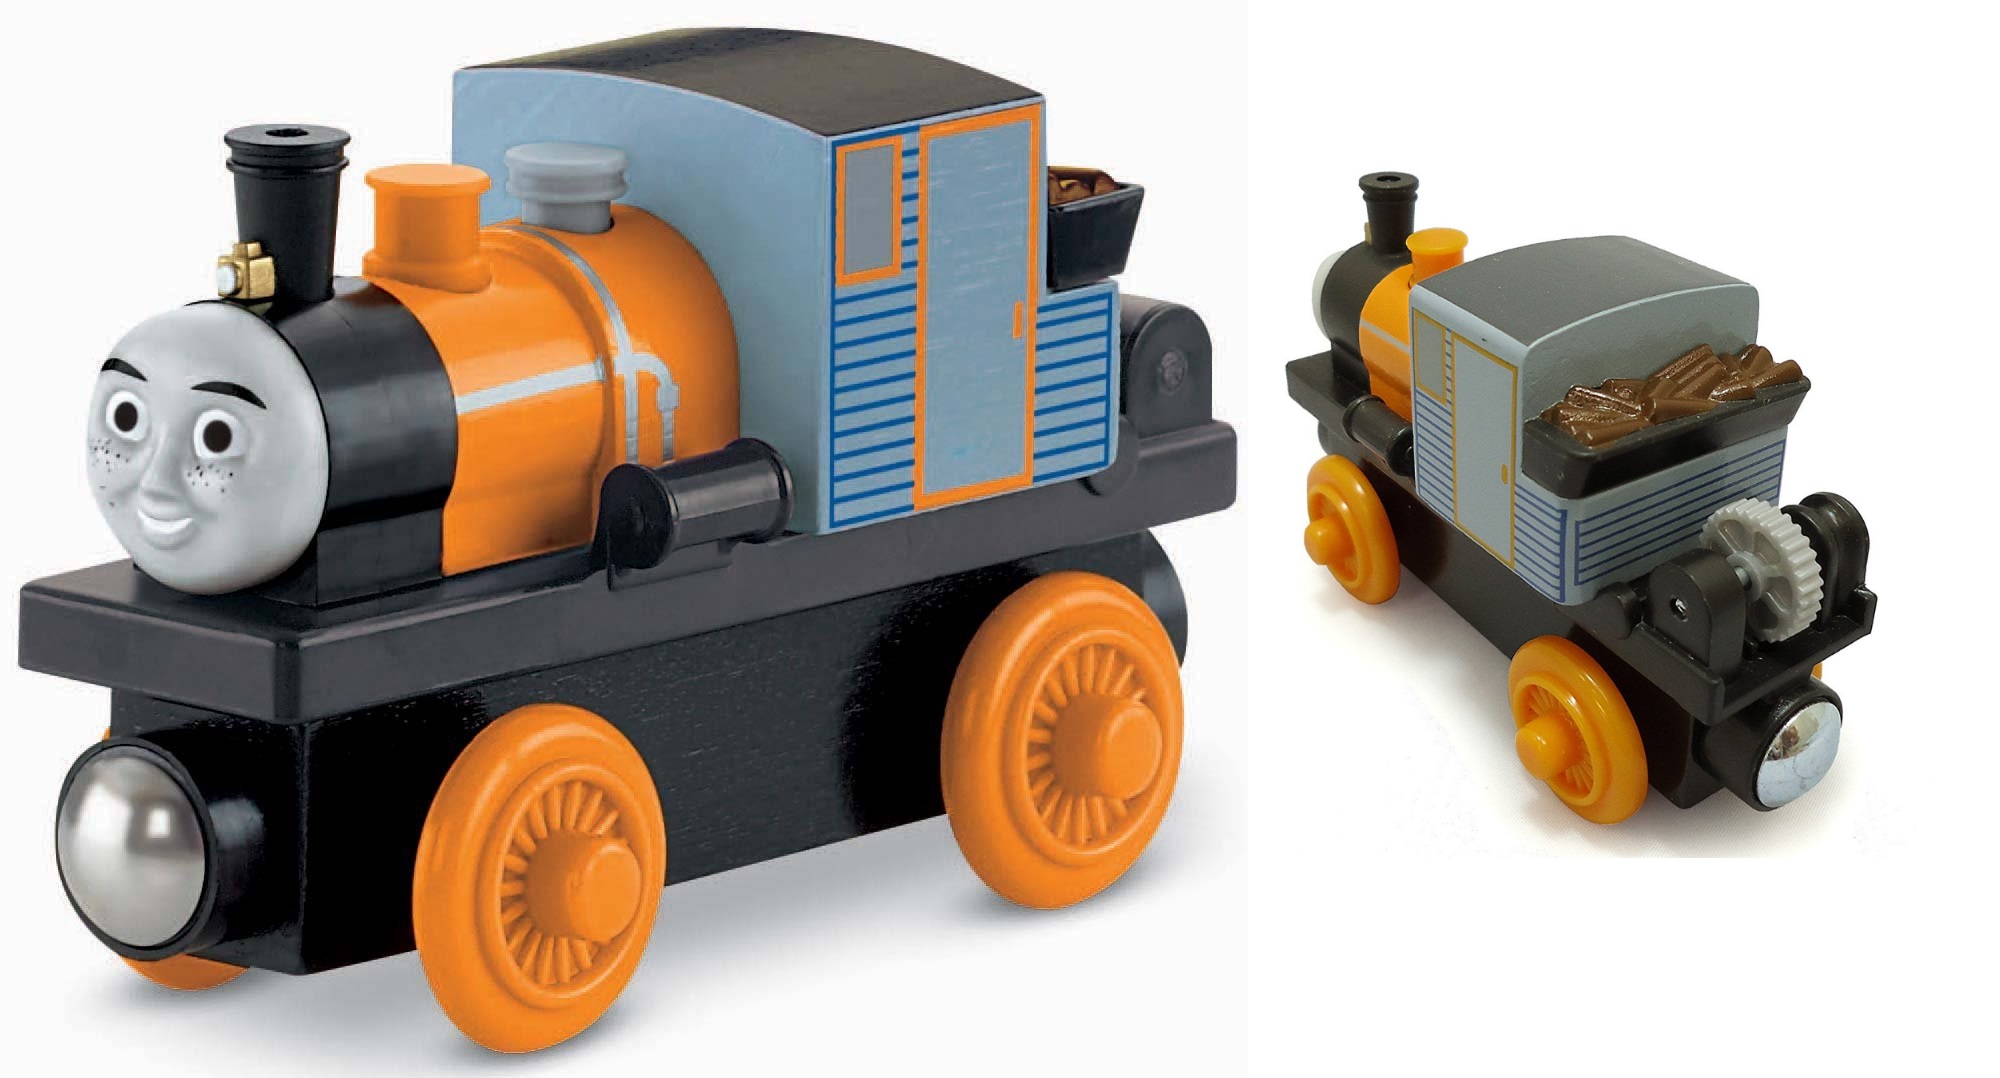 Thomas Wooden Railway Dash Engine Only $6.99! Works With Thomas Wooden Railway Sets!